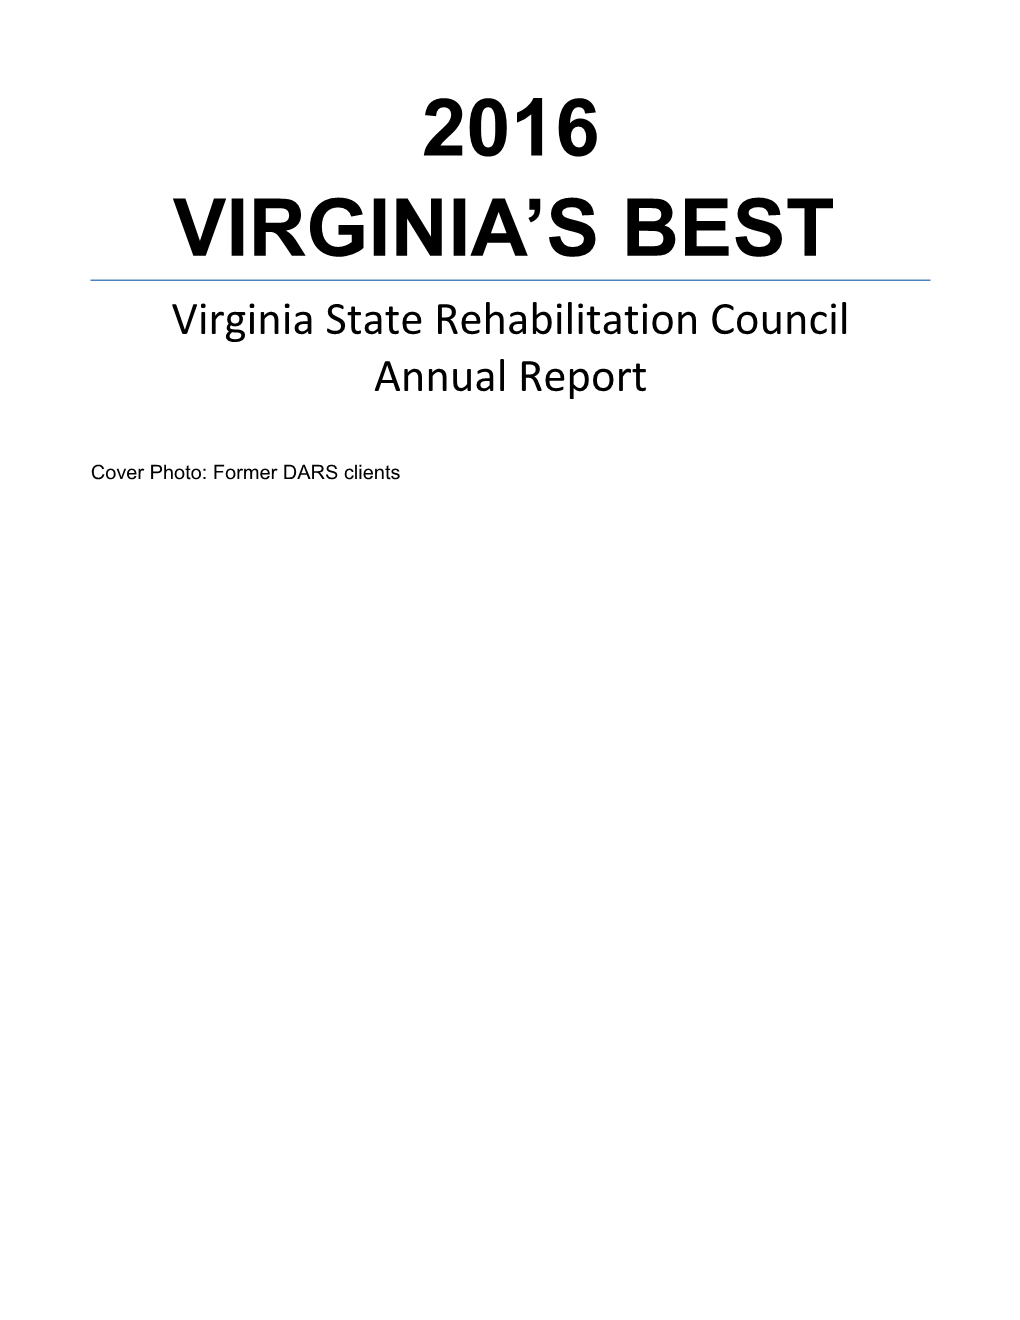 State Rehabilitation Council Annual Report 2016